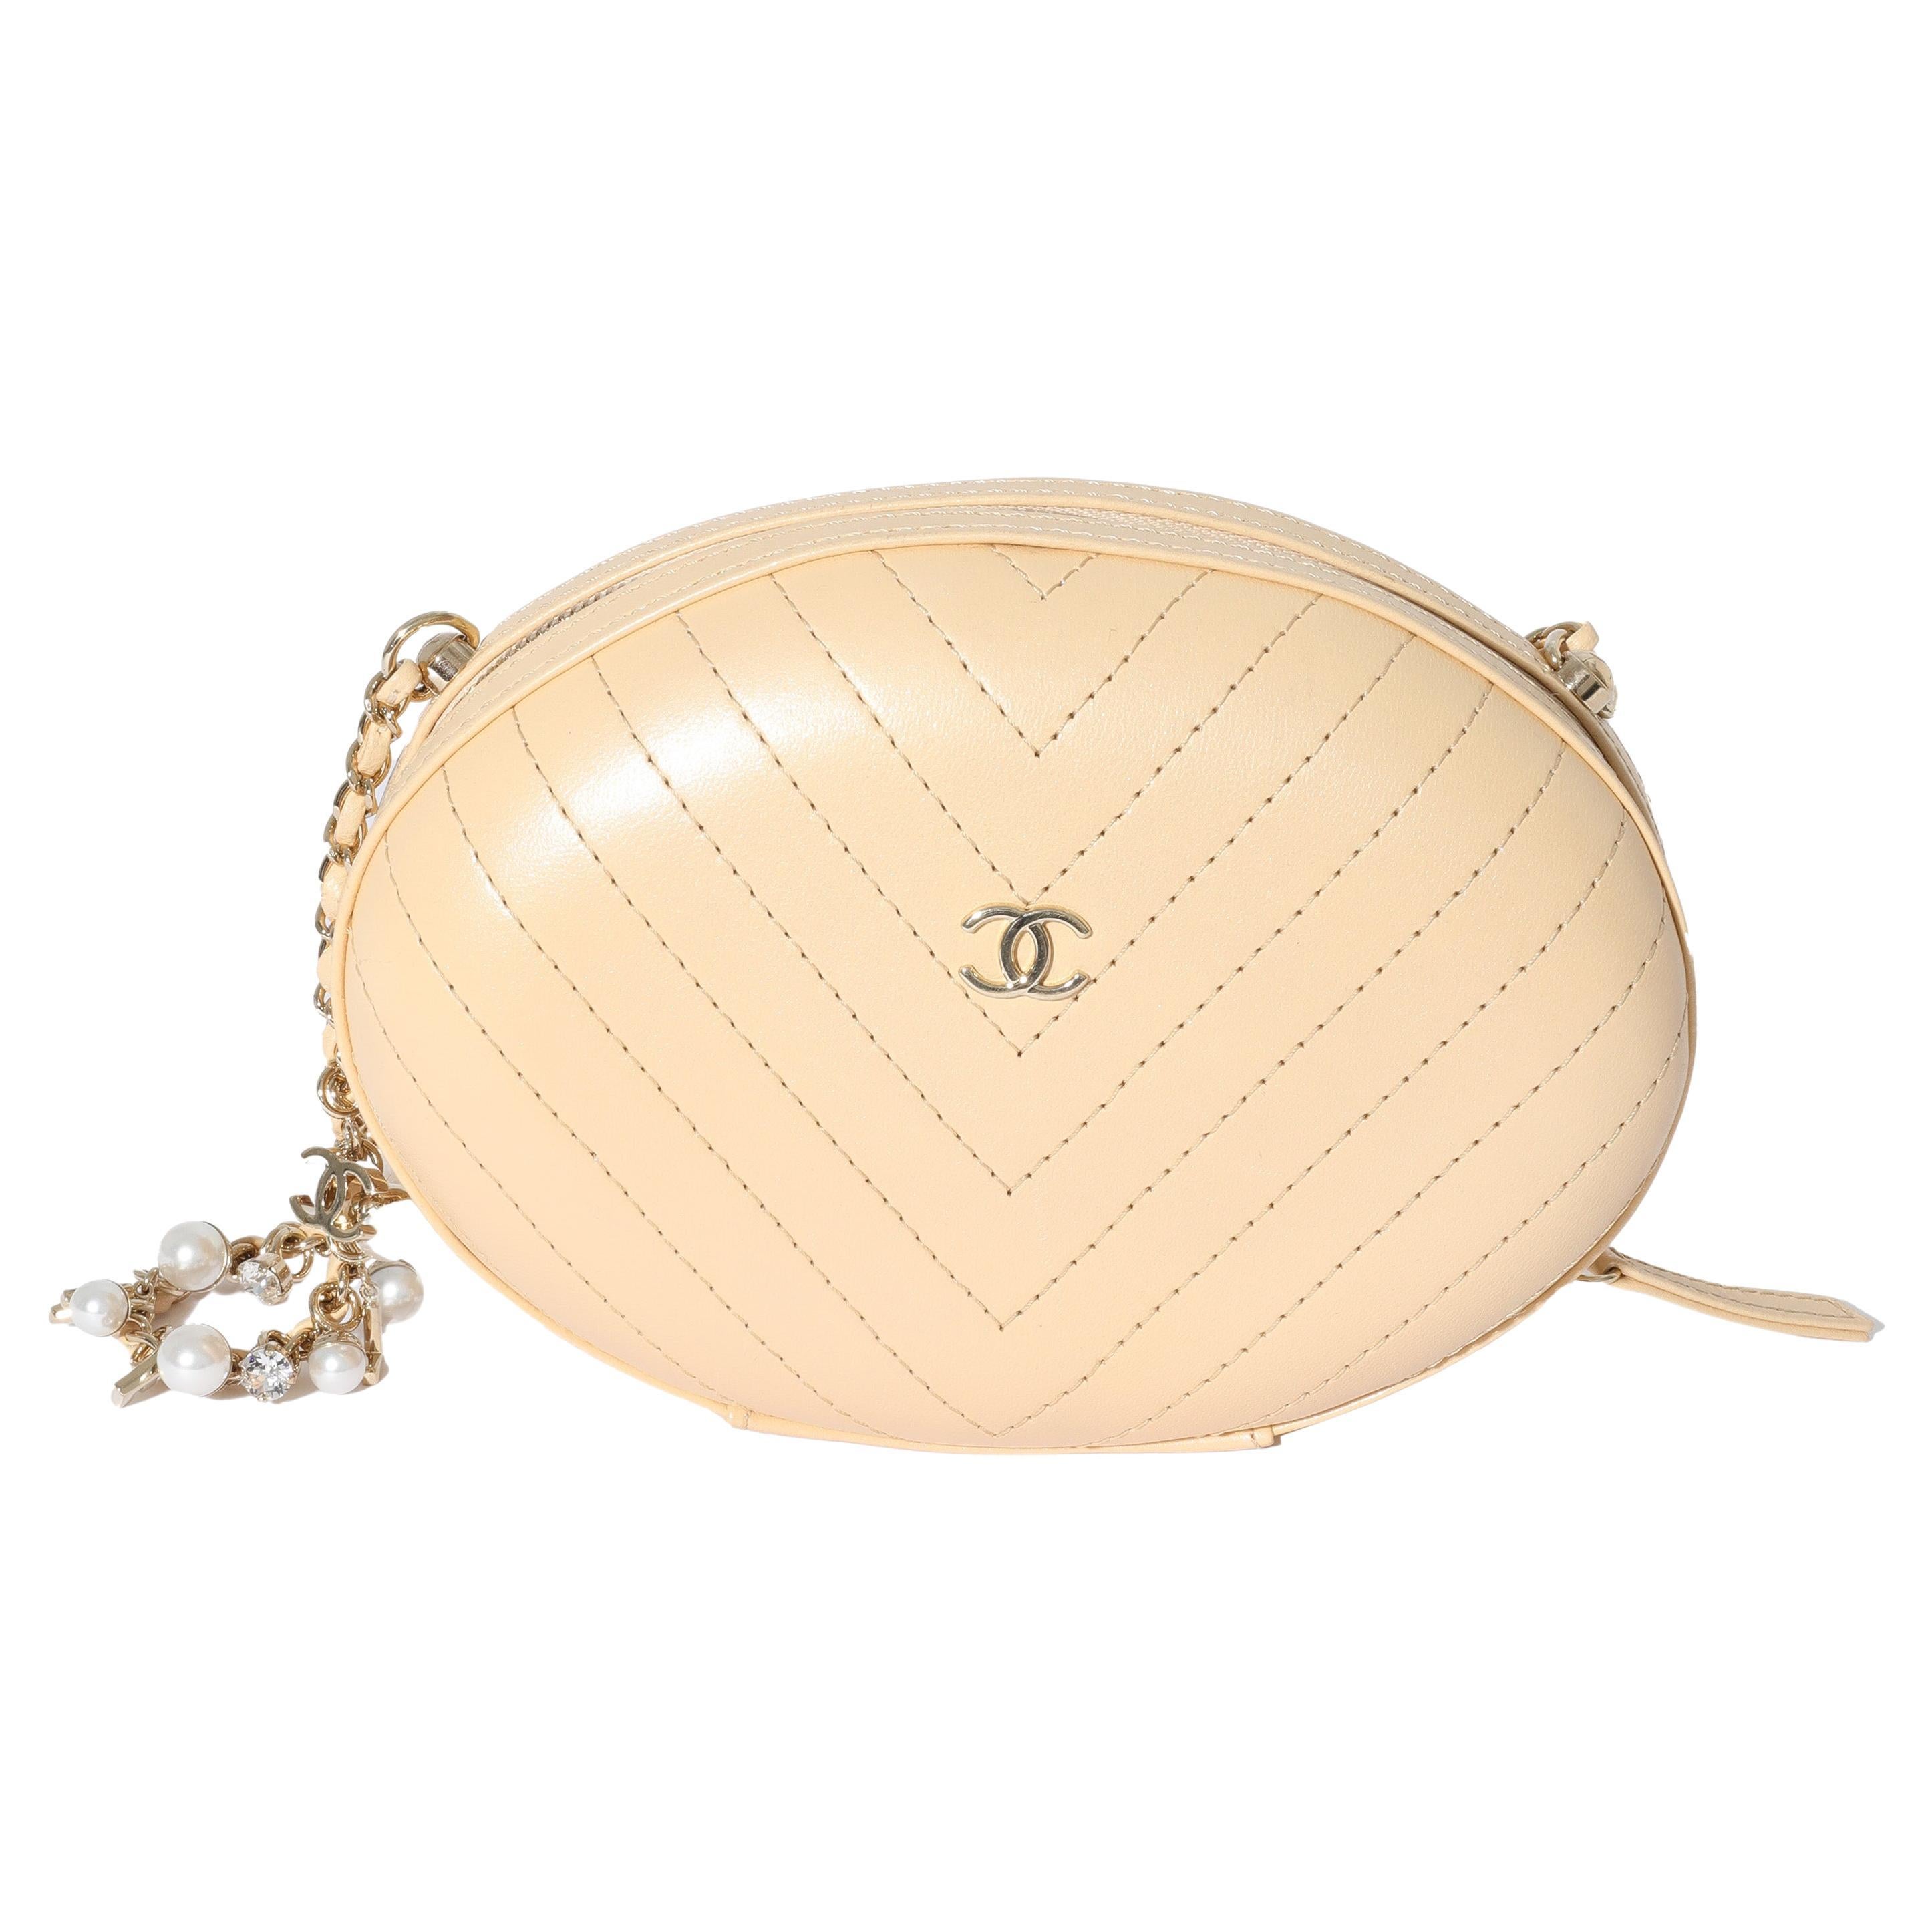 Chanel Beige Chevron Leather City Evening Box Bag For Sale